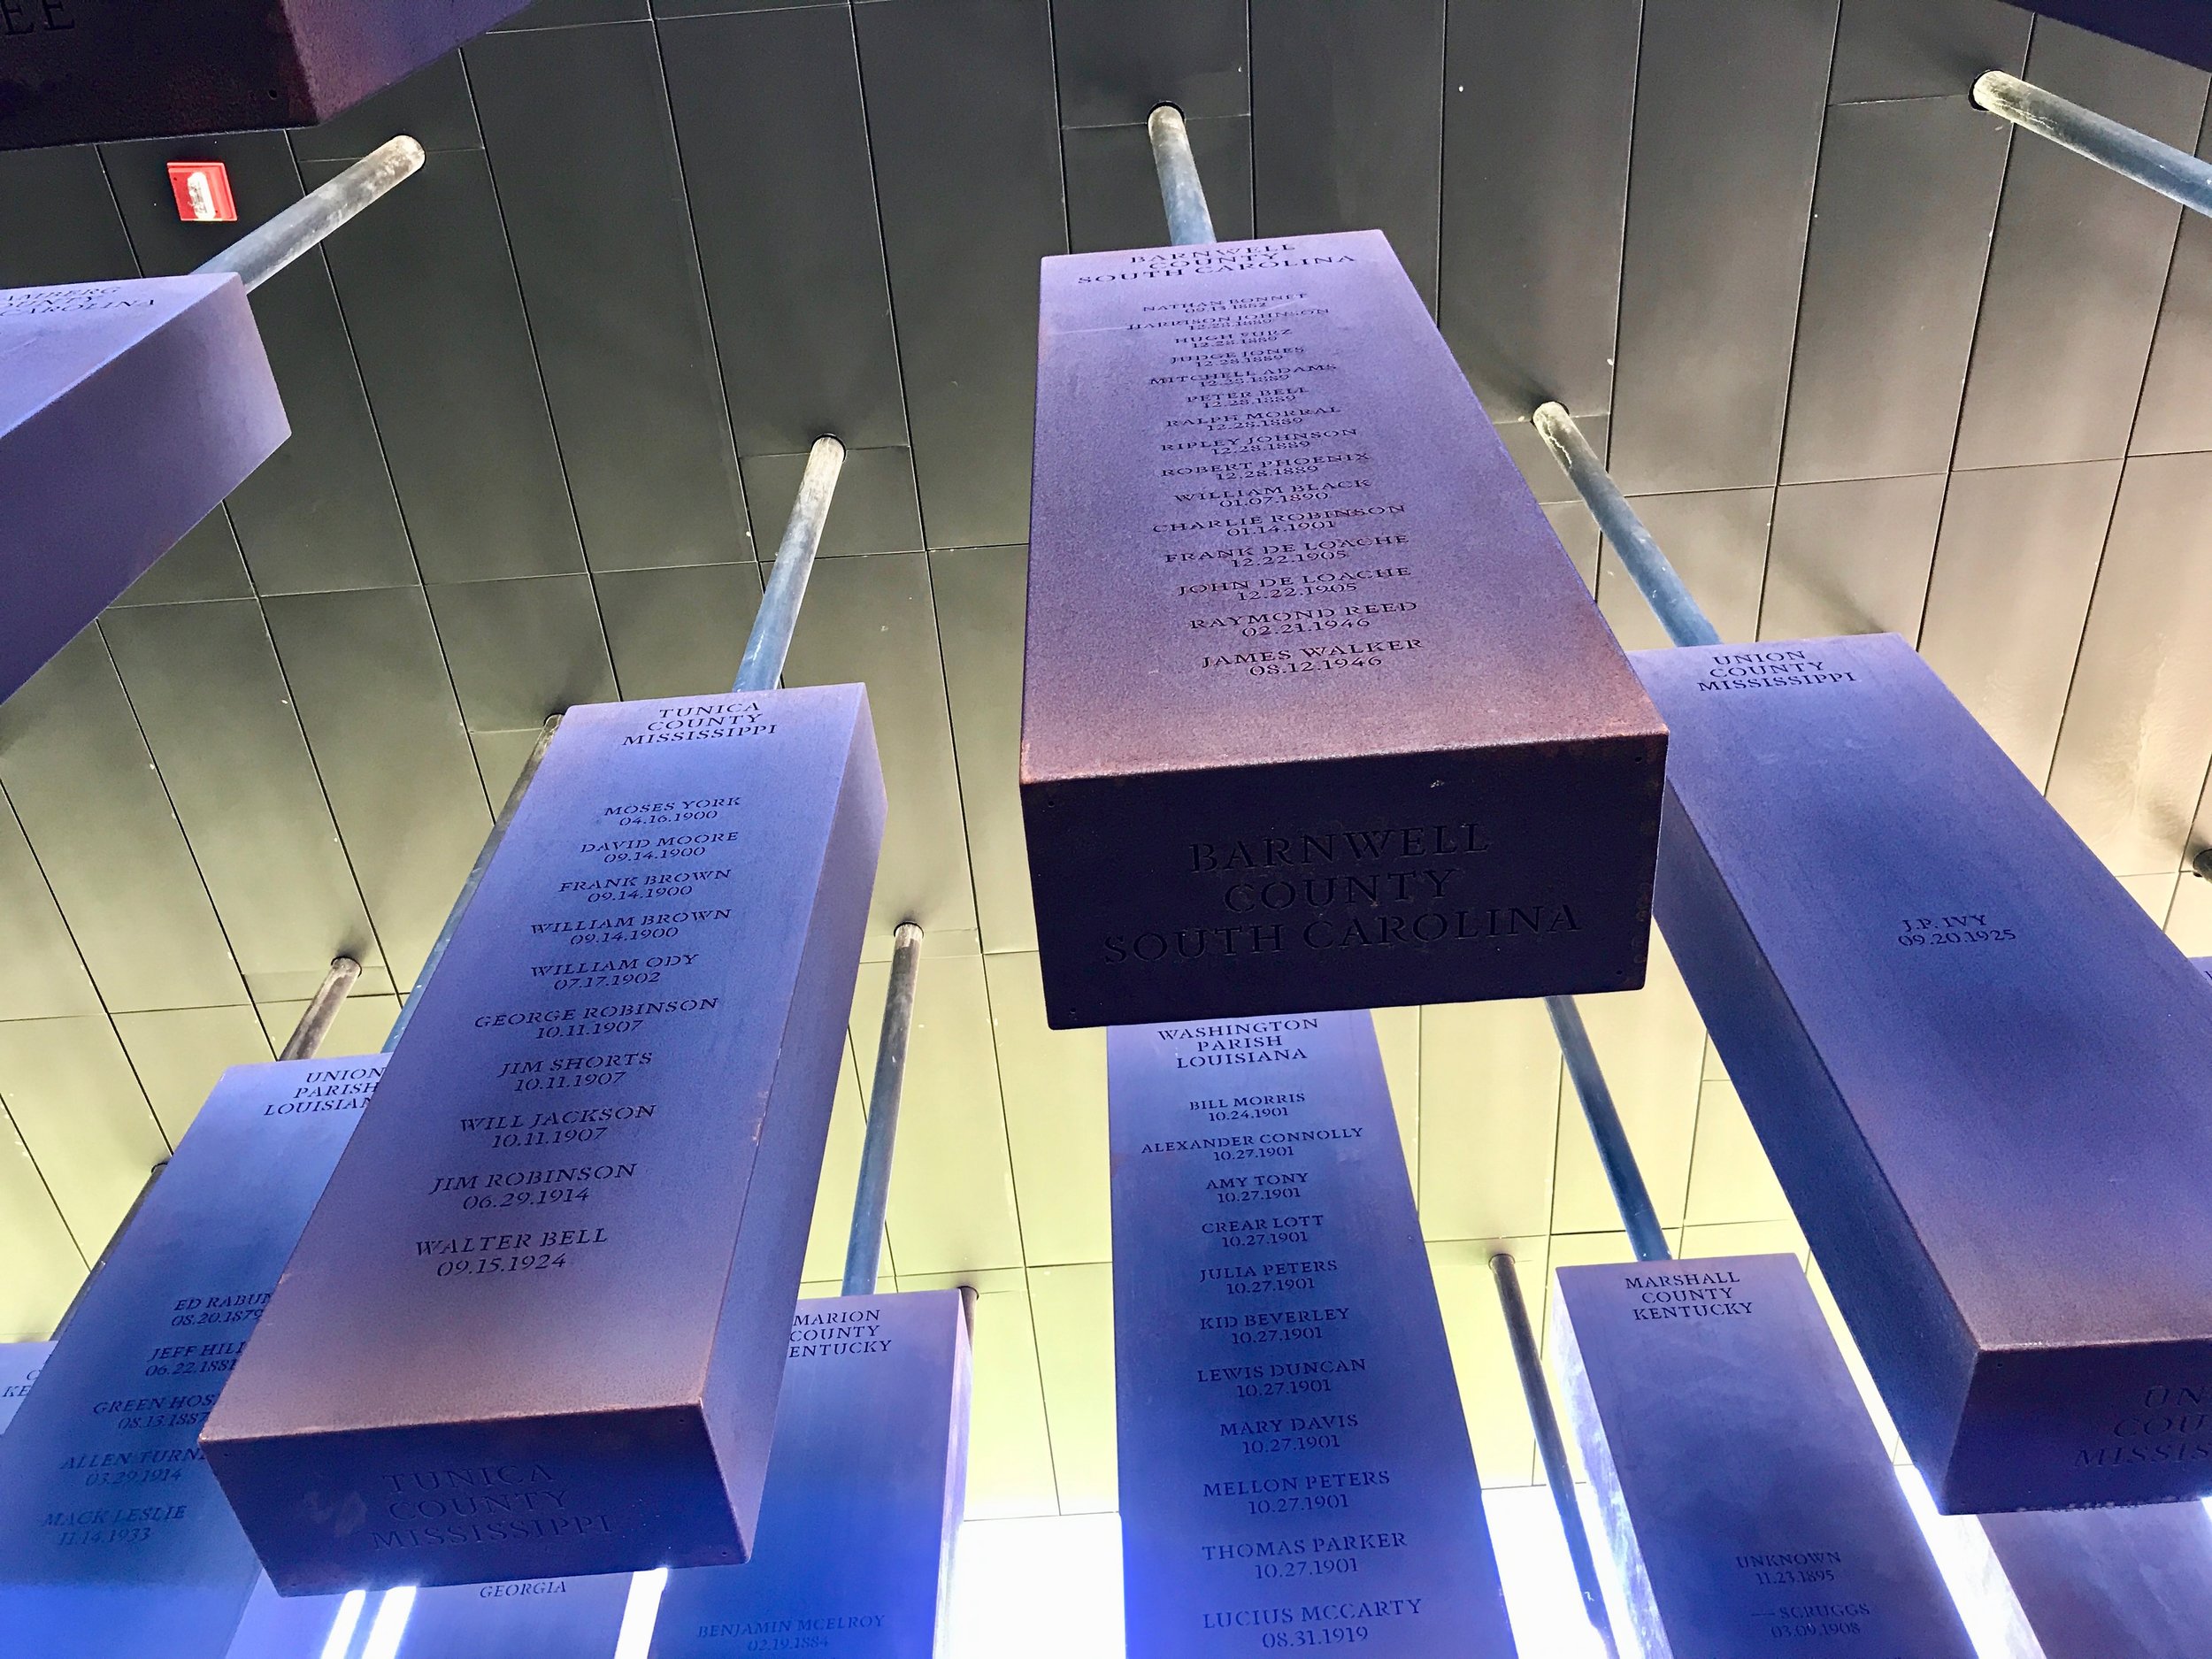  Steel slabs bearing the names of lynching victims killed between the Civil War and 1949 hang at the National Memorial for Peace and Justice in Montgomery, Alabama.      